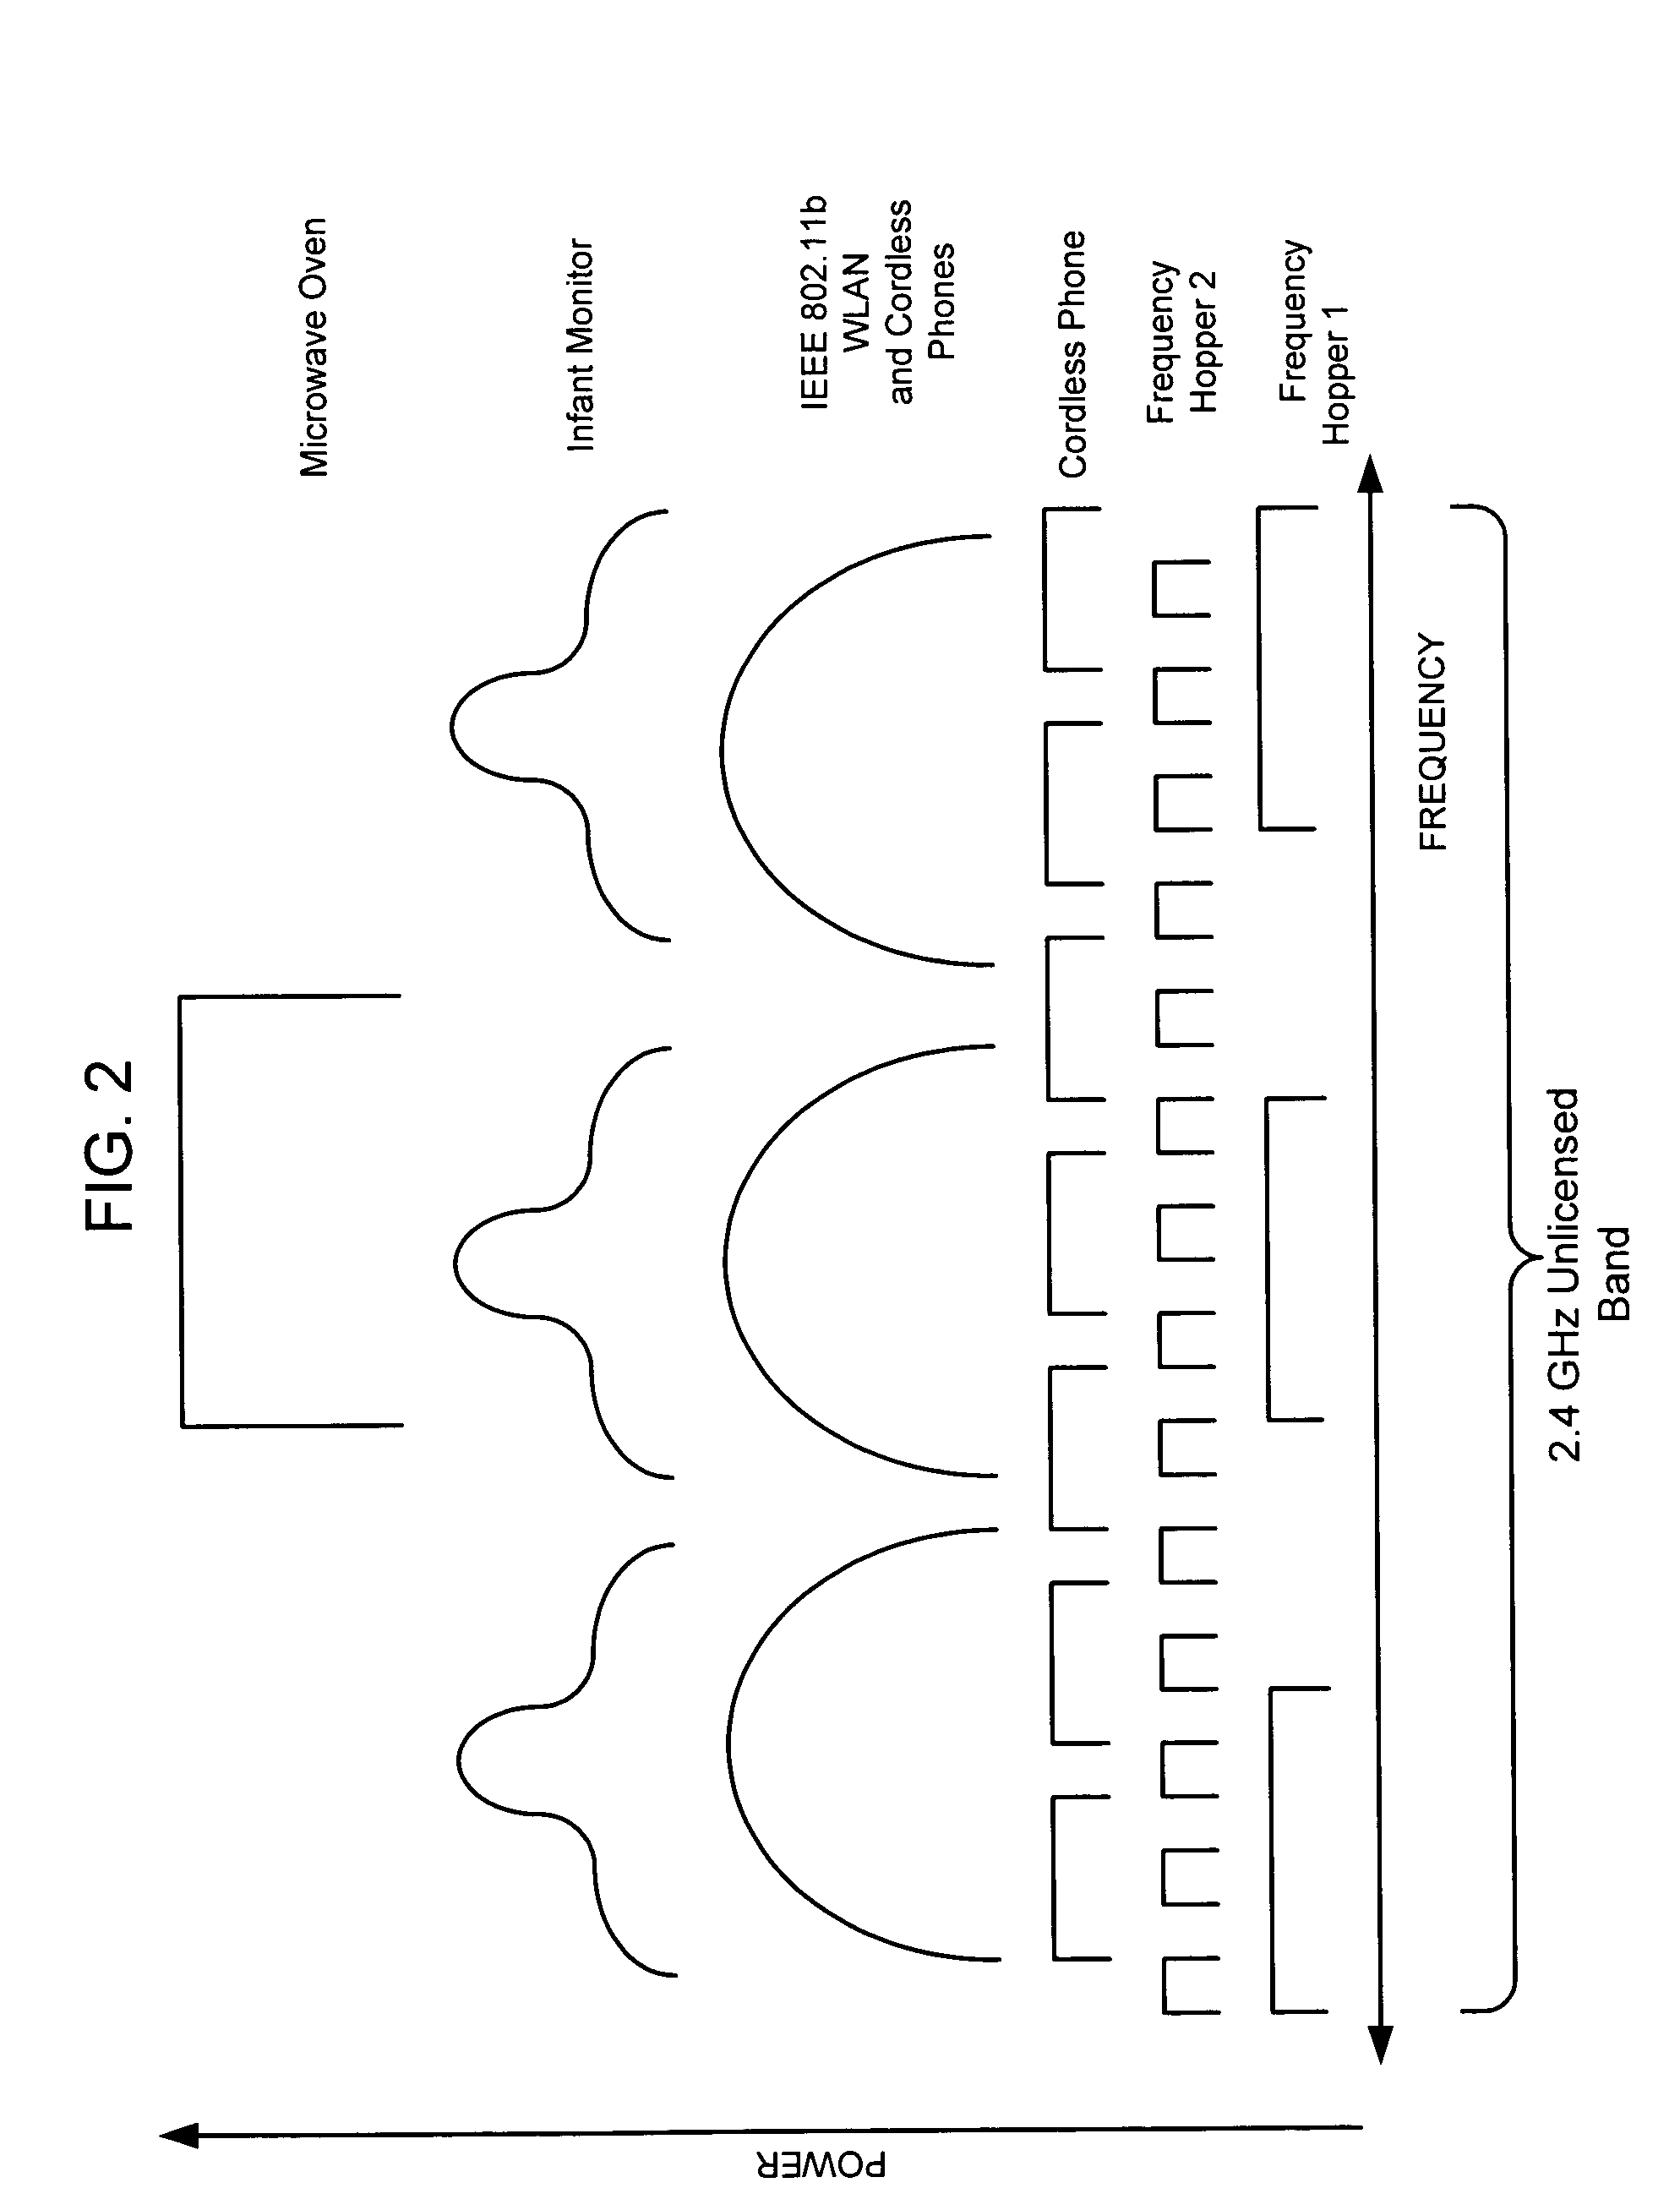 System and method for management of a shared frequency band using client-specific management techniques